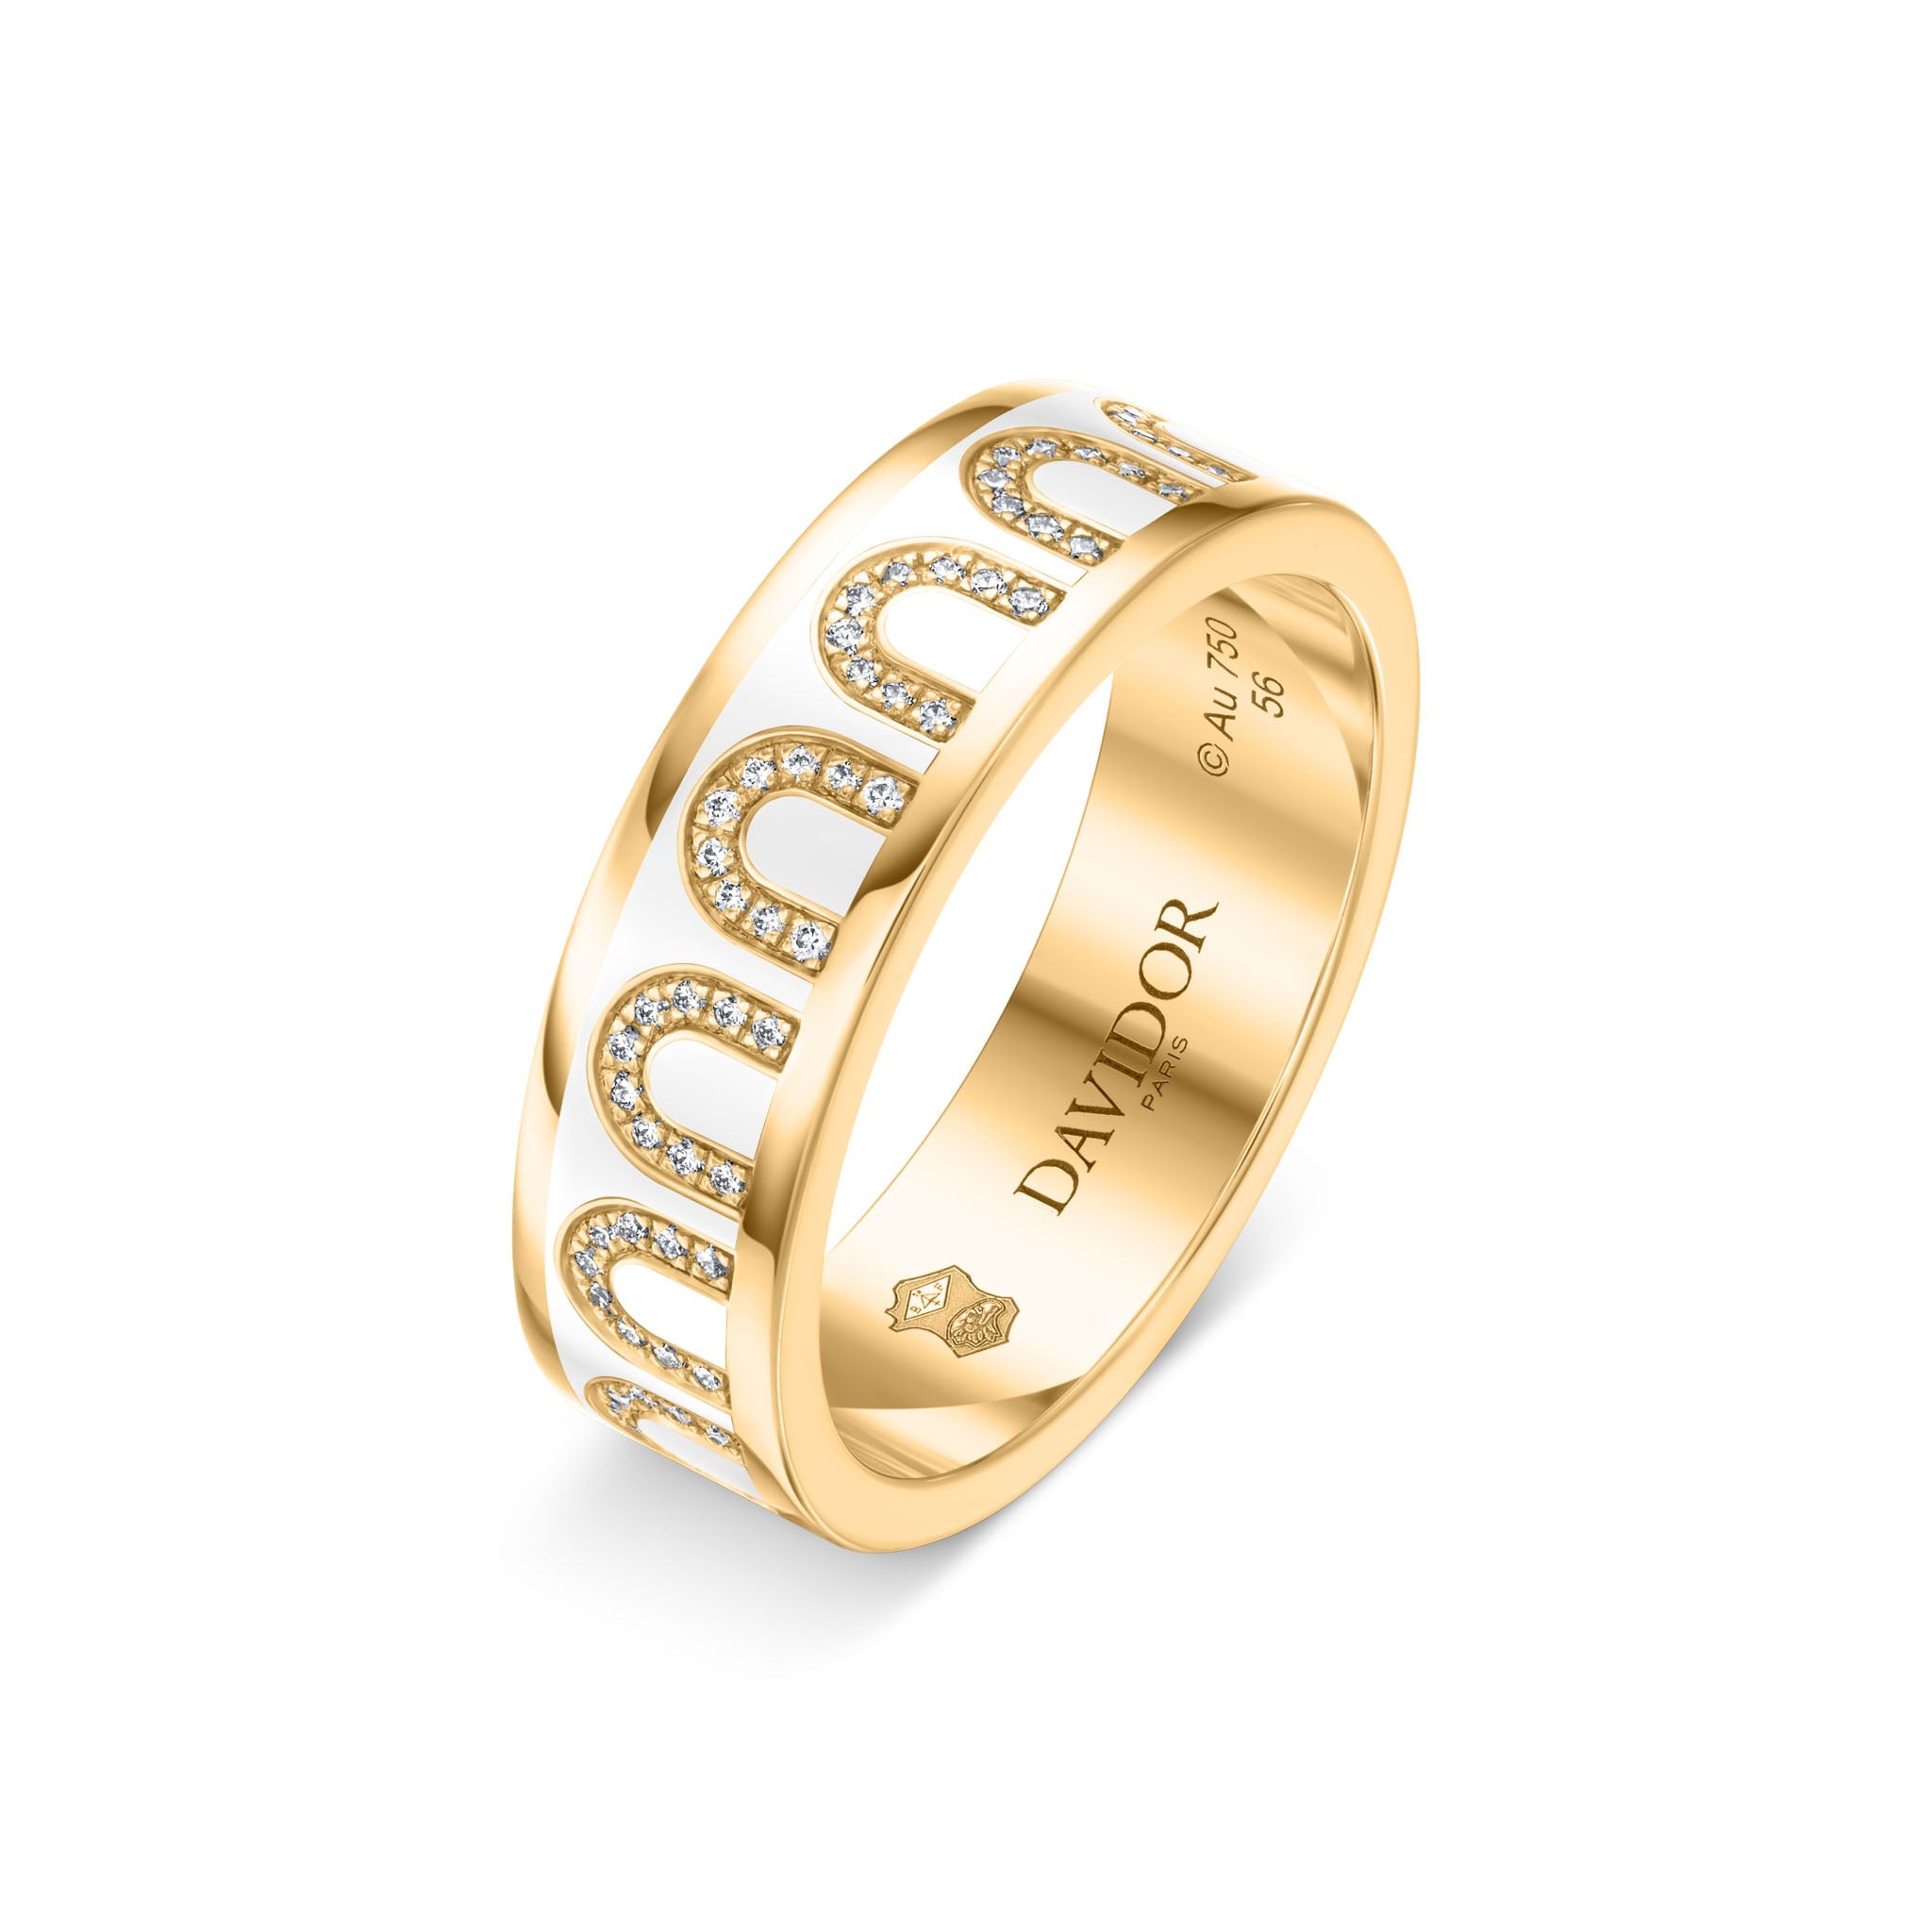 L’Arc de DAVIDOR Ring MM, 18k Yellow Gold with Neige Lacquered Ceramic and Arcade Diamonds